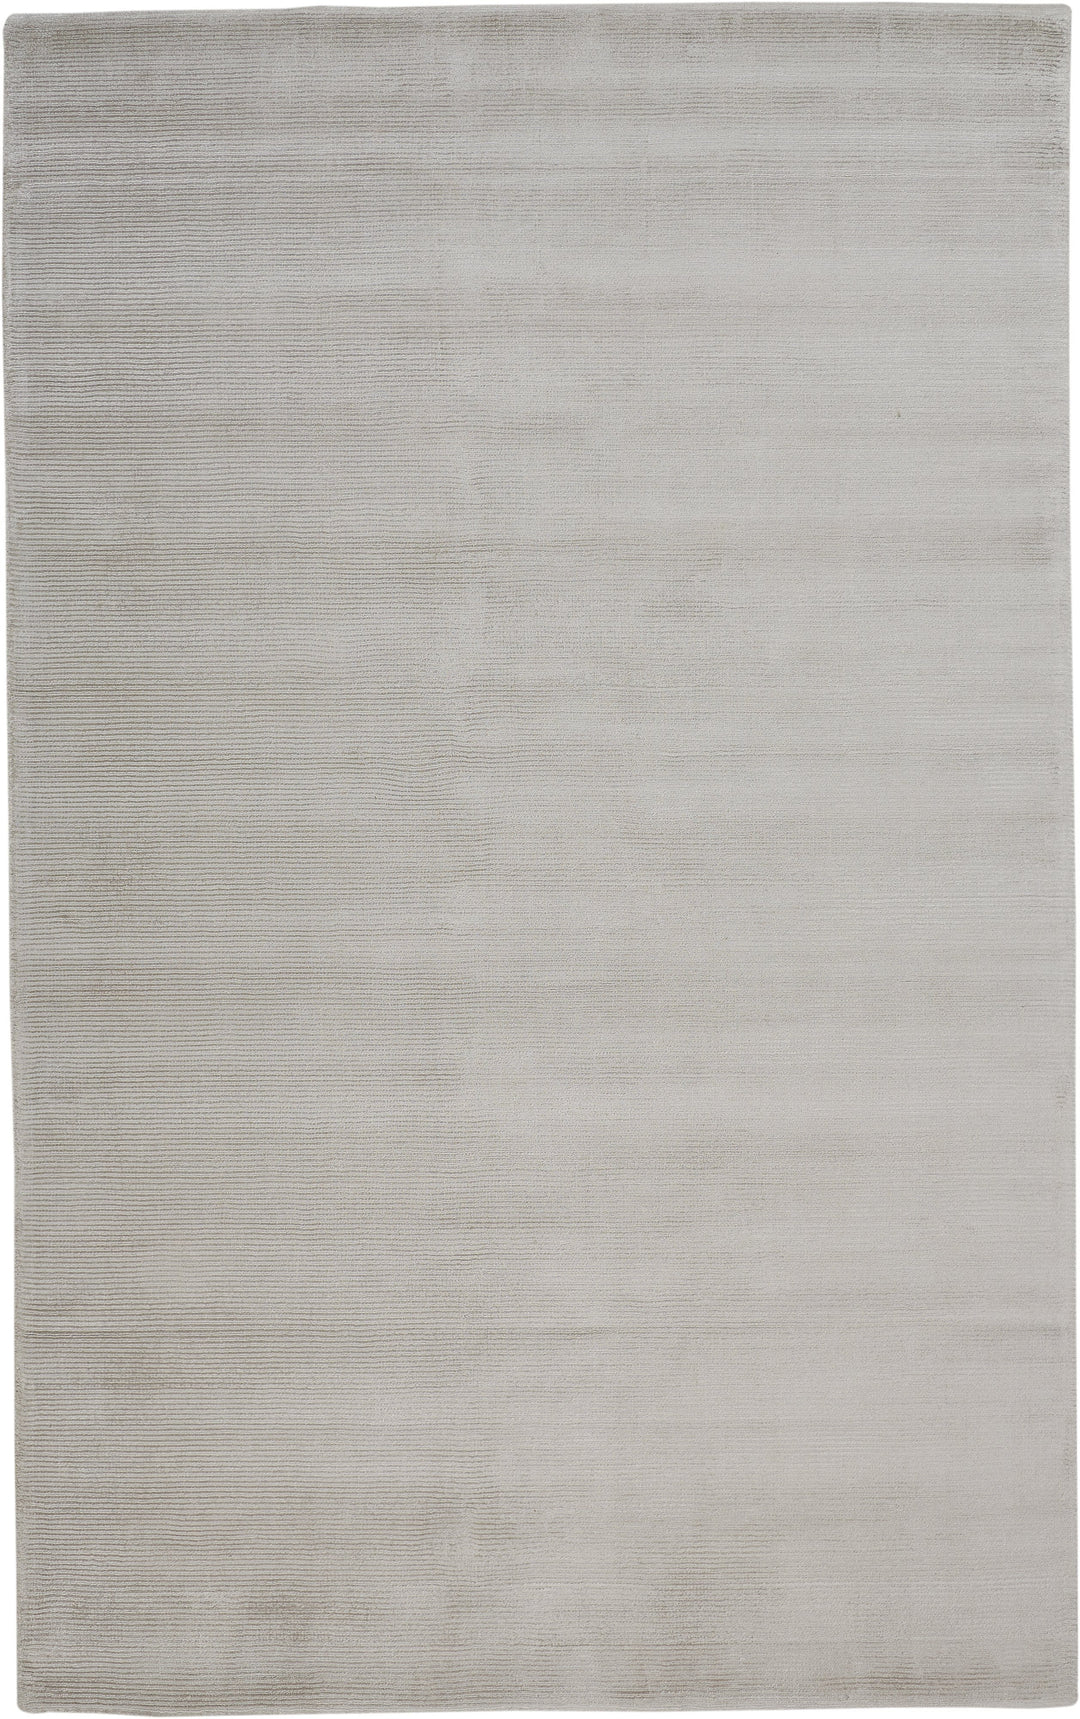 Feizy Feizy Batisse Luxe Viscose Handwoven Rug - Available in 6 Sizes - Light Gray & SIlver 3'-6" x 5'-6" 6698717FSLV000C50